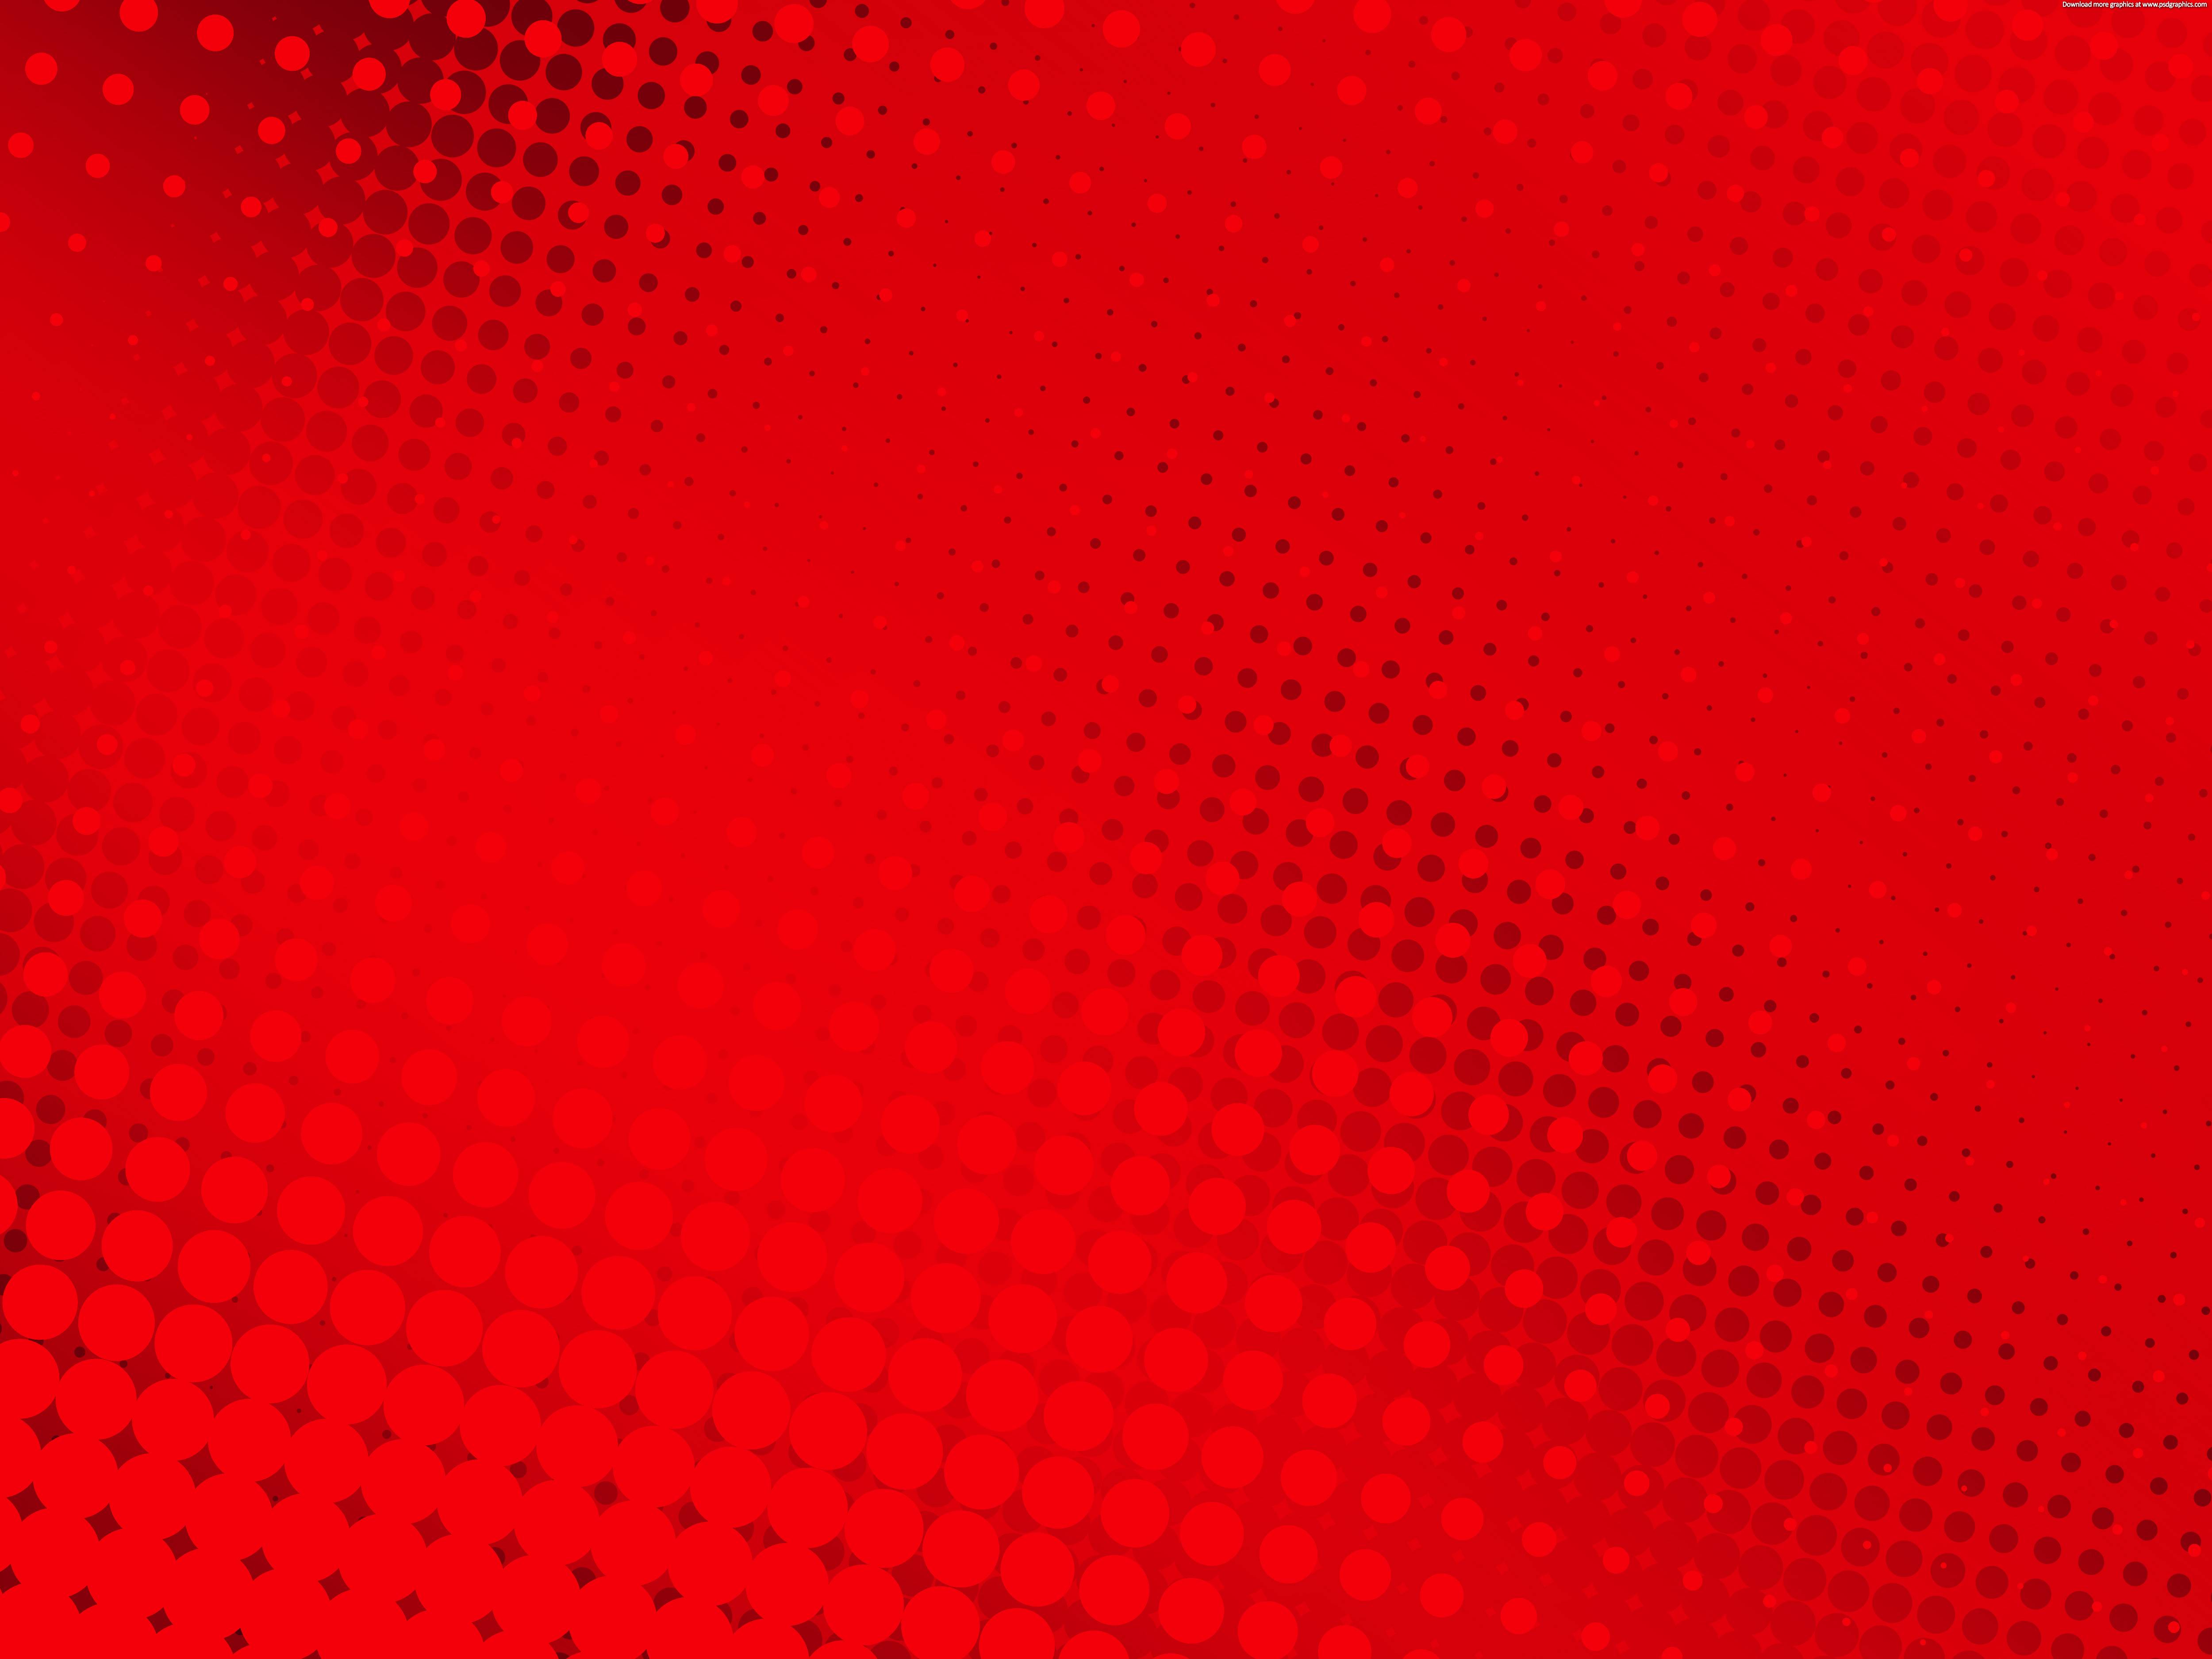 Red halftone background